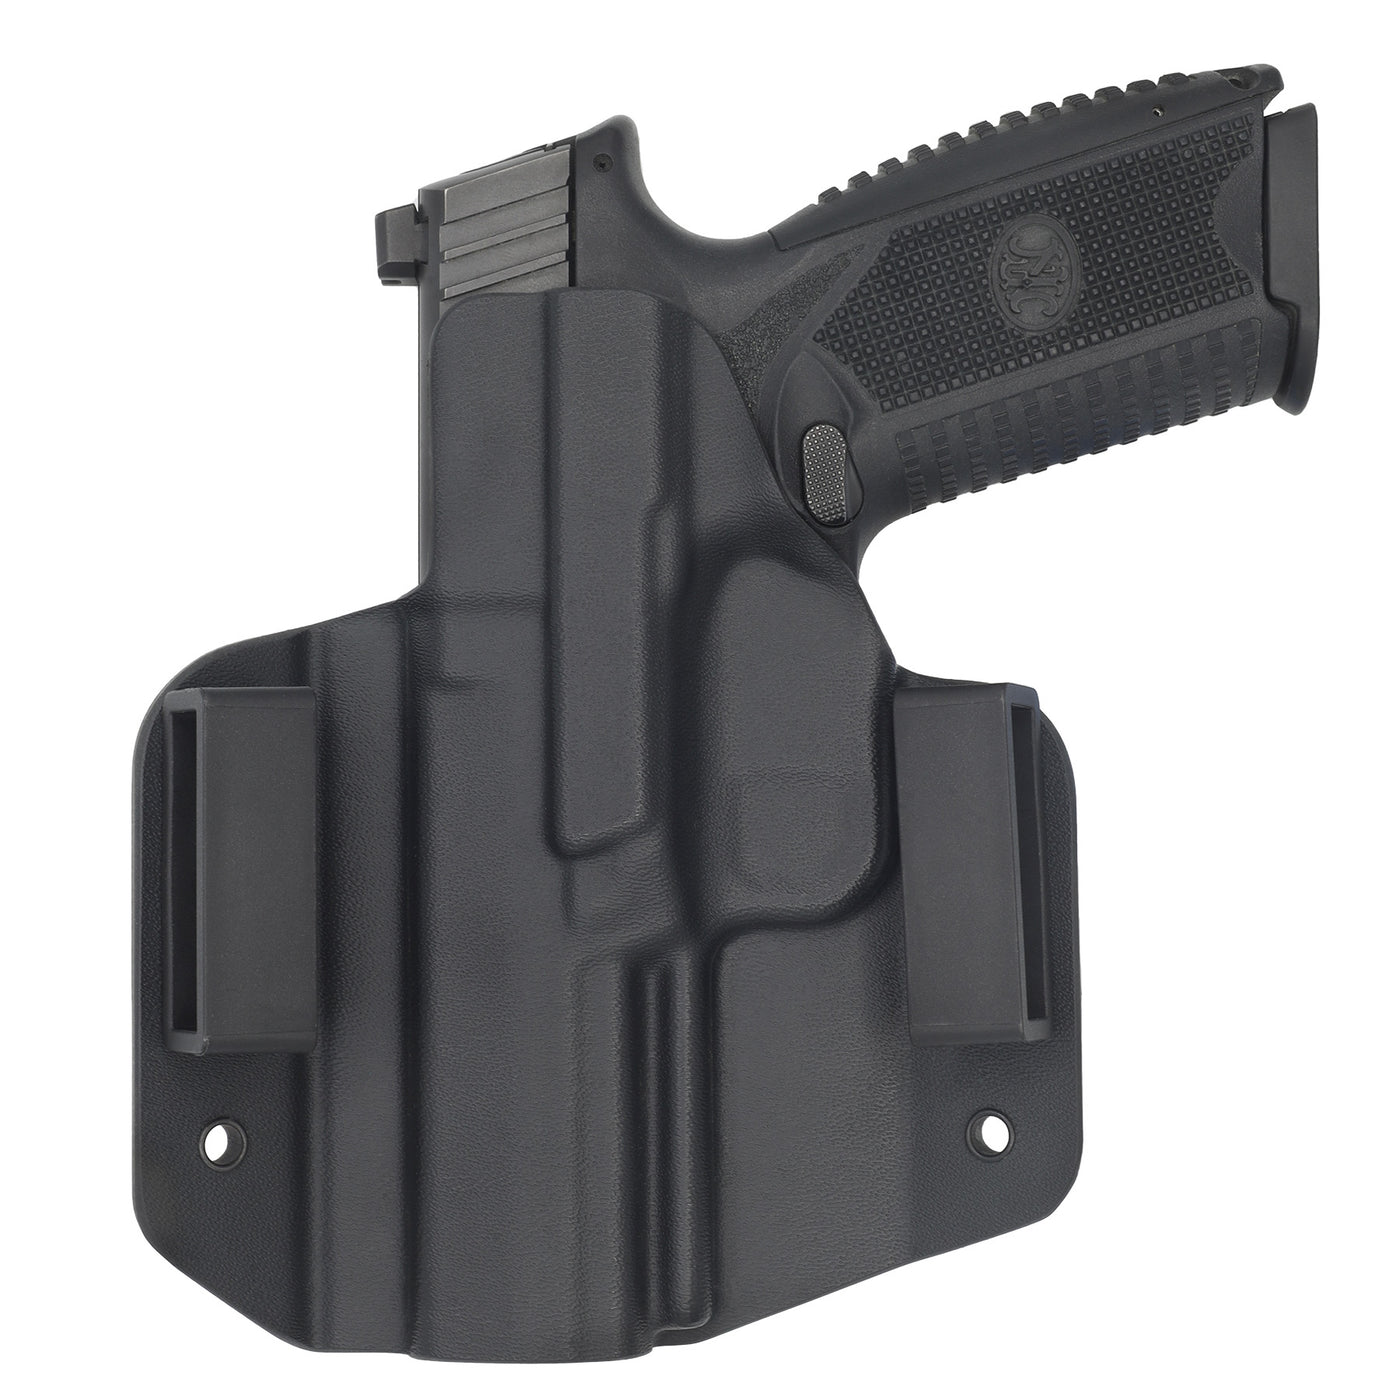 FN 509 OWB Covert Kydex Holster made by C and G Holsters. This is made for an Outside the waist band or OWB. Showing the back of the holster with Firearm in the Holstered position